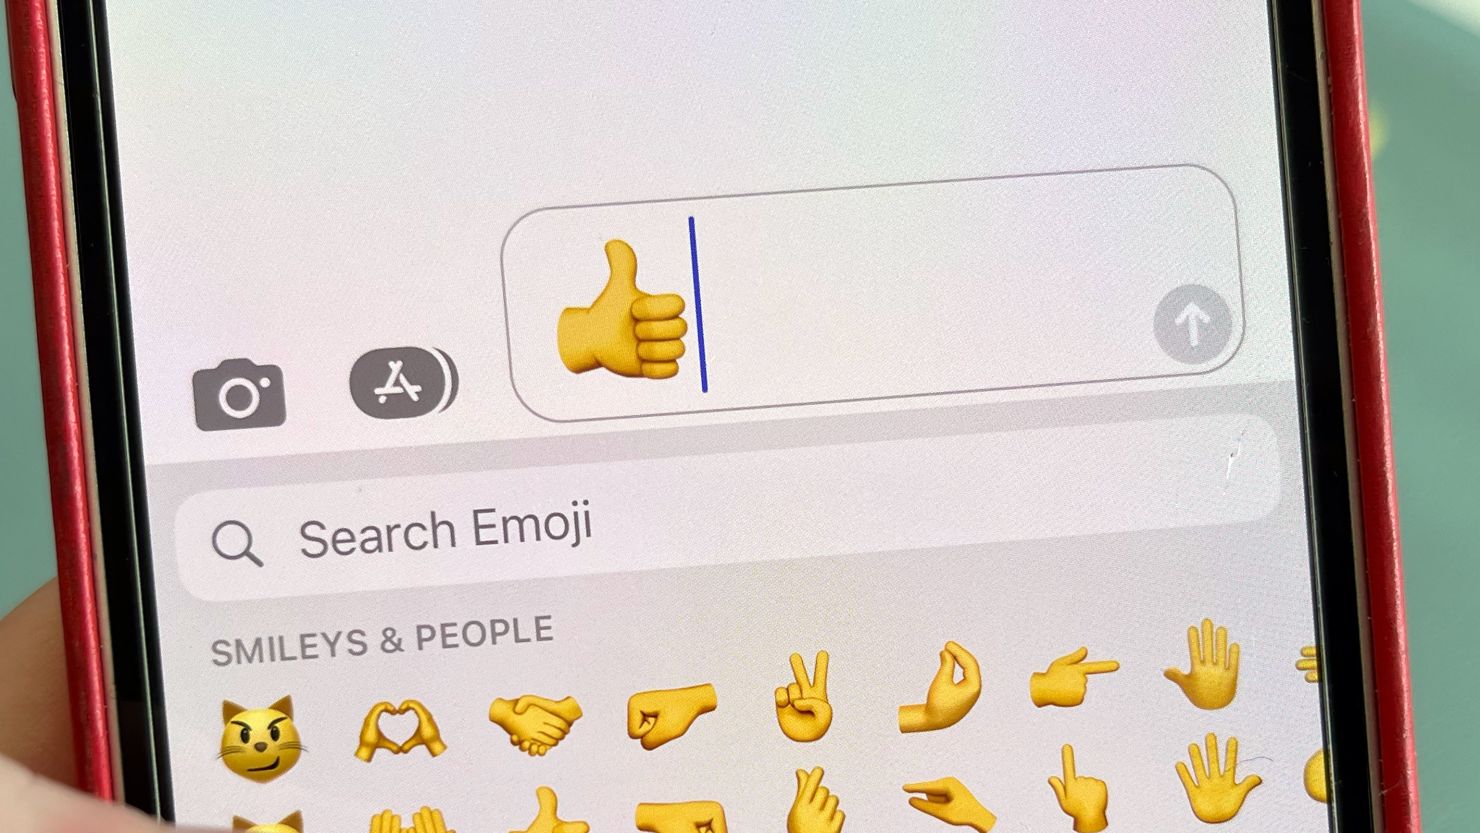 Farmer owes $82,000 in contract dispute over use of a 'thumbs-up' emoji,  judge says